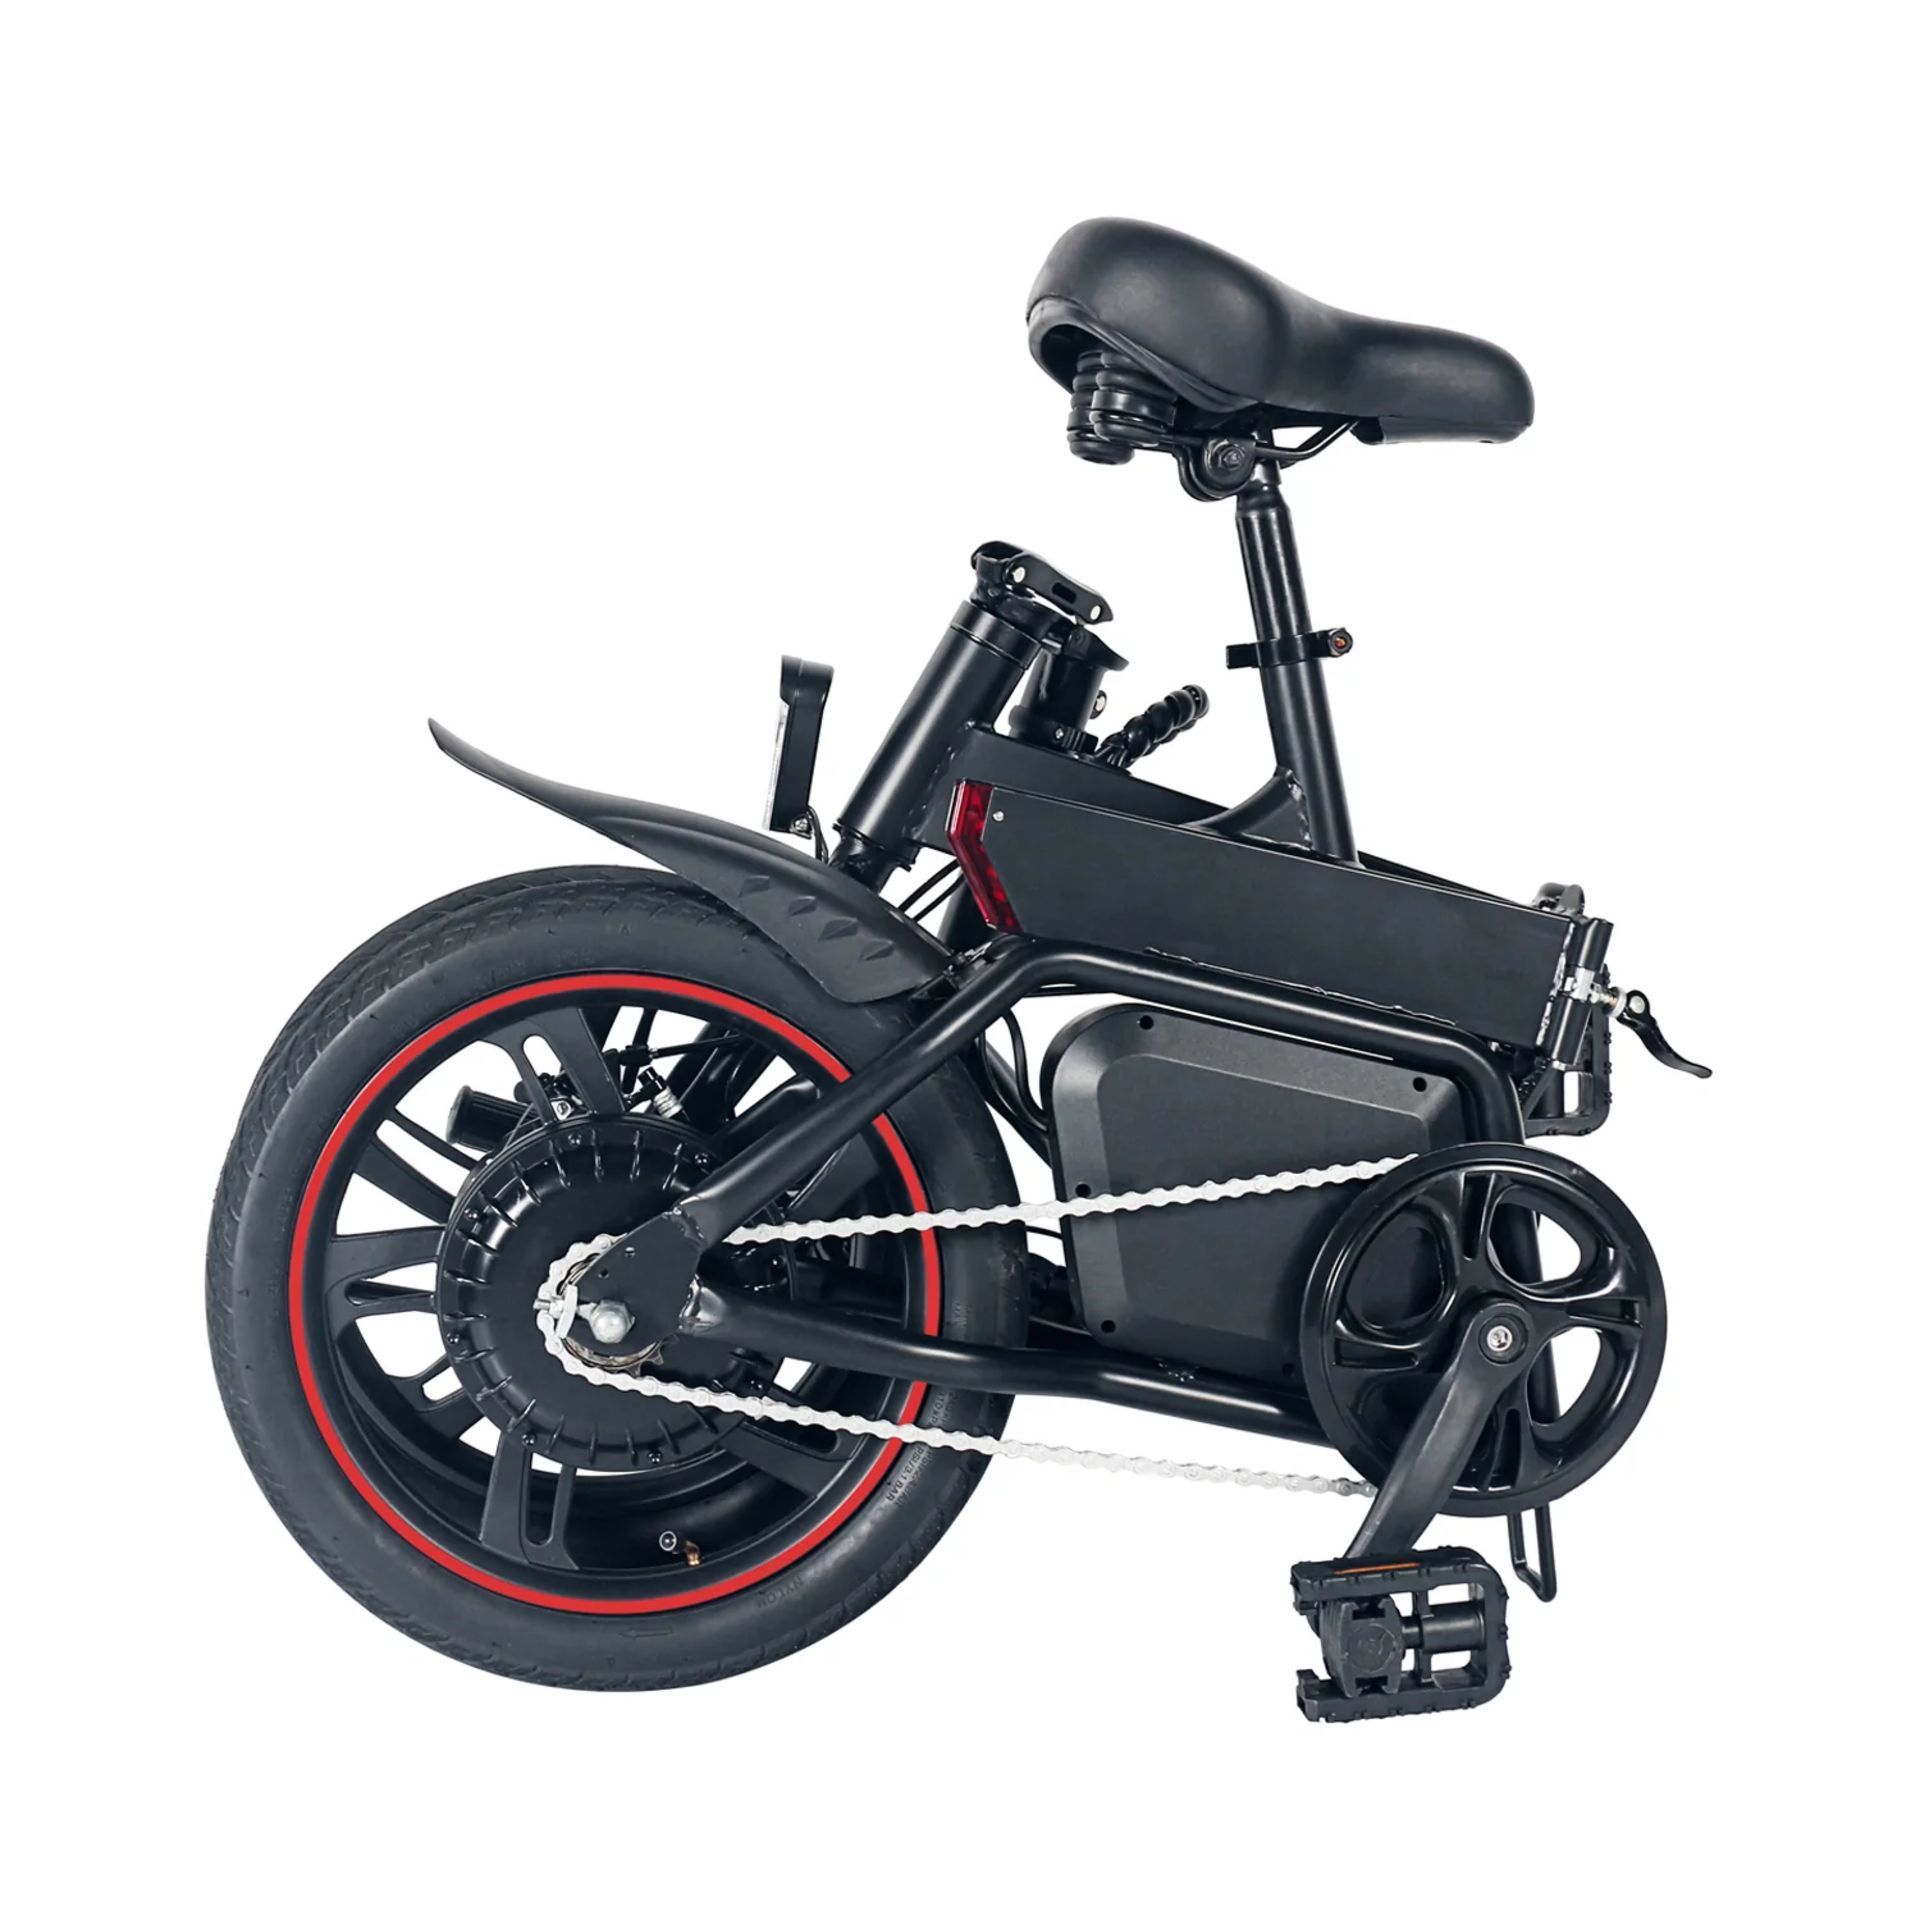 BRAND NEW Windgoo B20 Pro Electric Bike. RRP £1,100.99. With 16-inch-wide tires and a frame of - Image 5 of 6